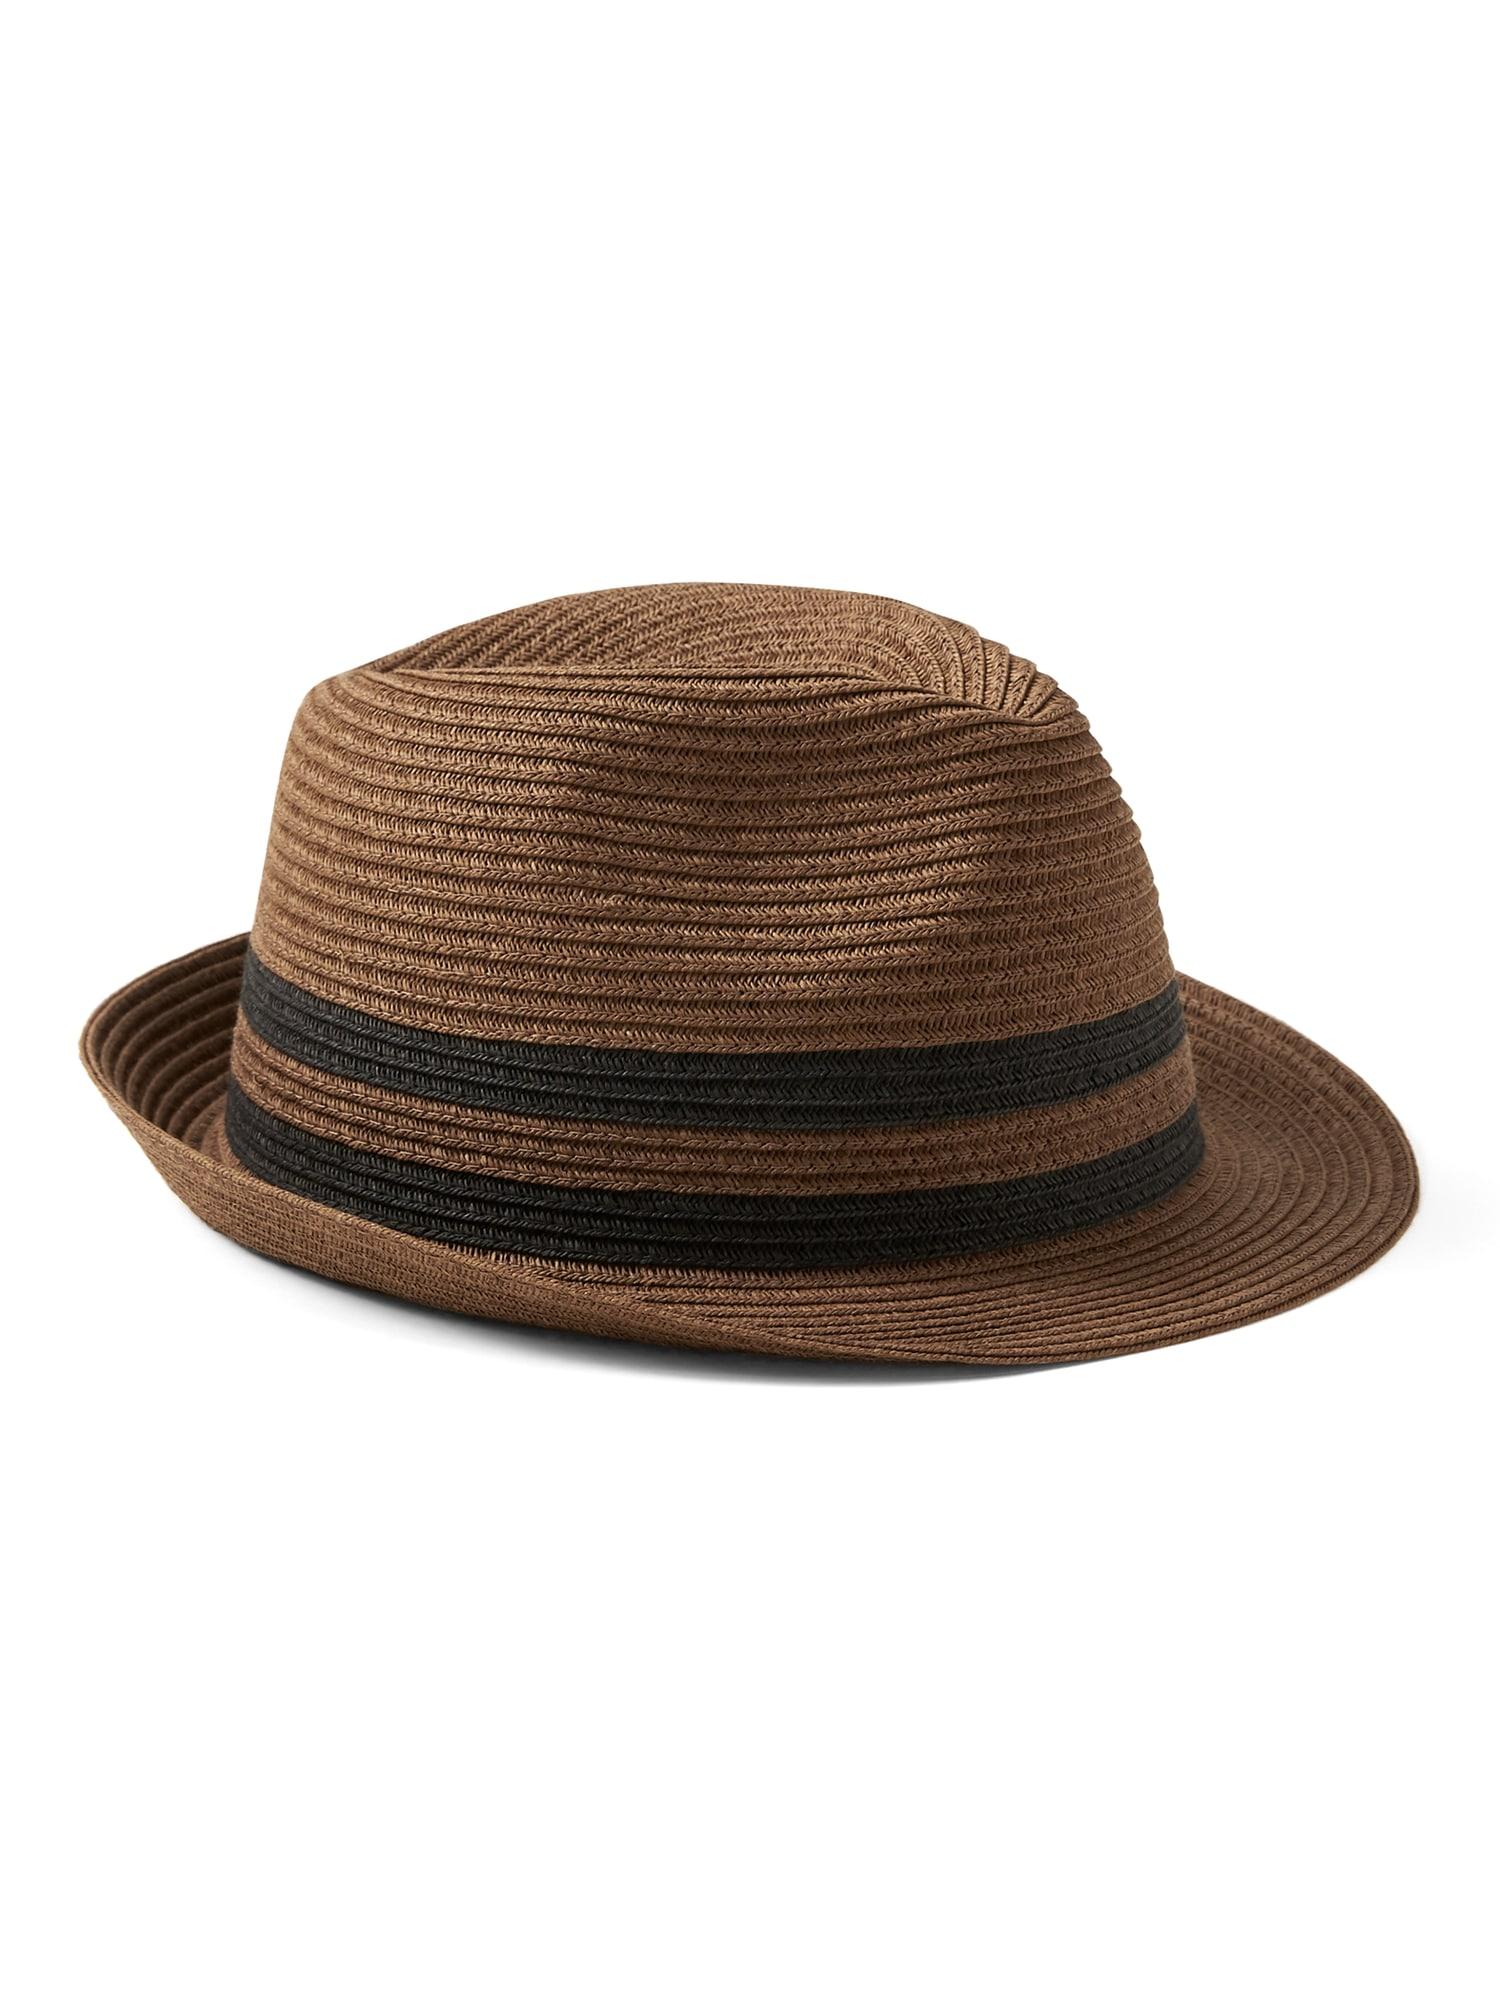 Banana Republic Straw Trilby Hat in Brown for Men - Lyst